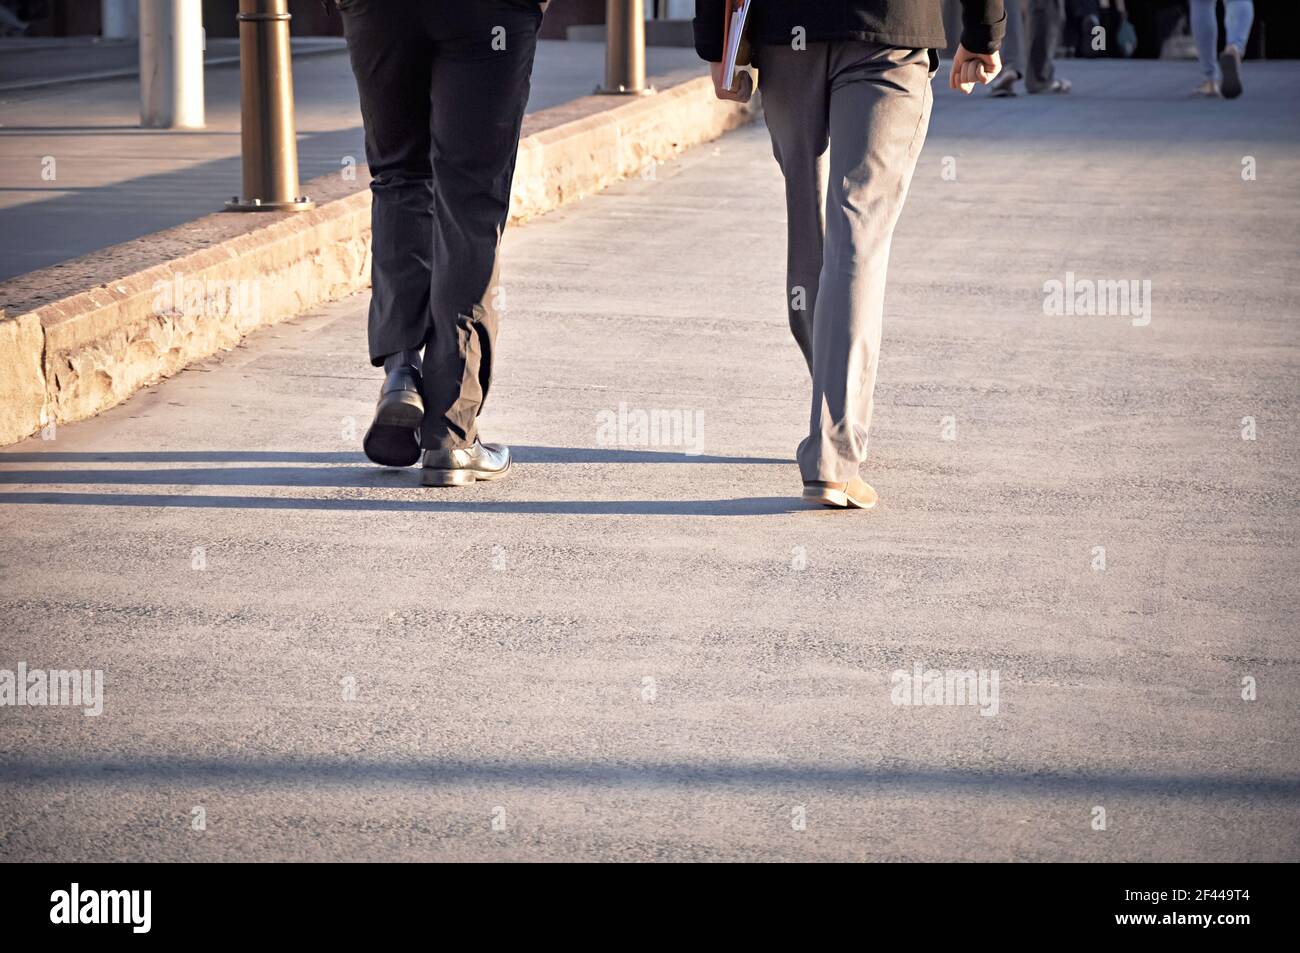 Legs of two men walking on the pavement Stock Photo